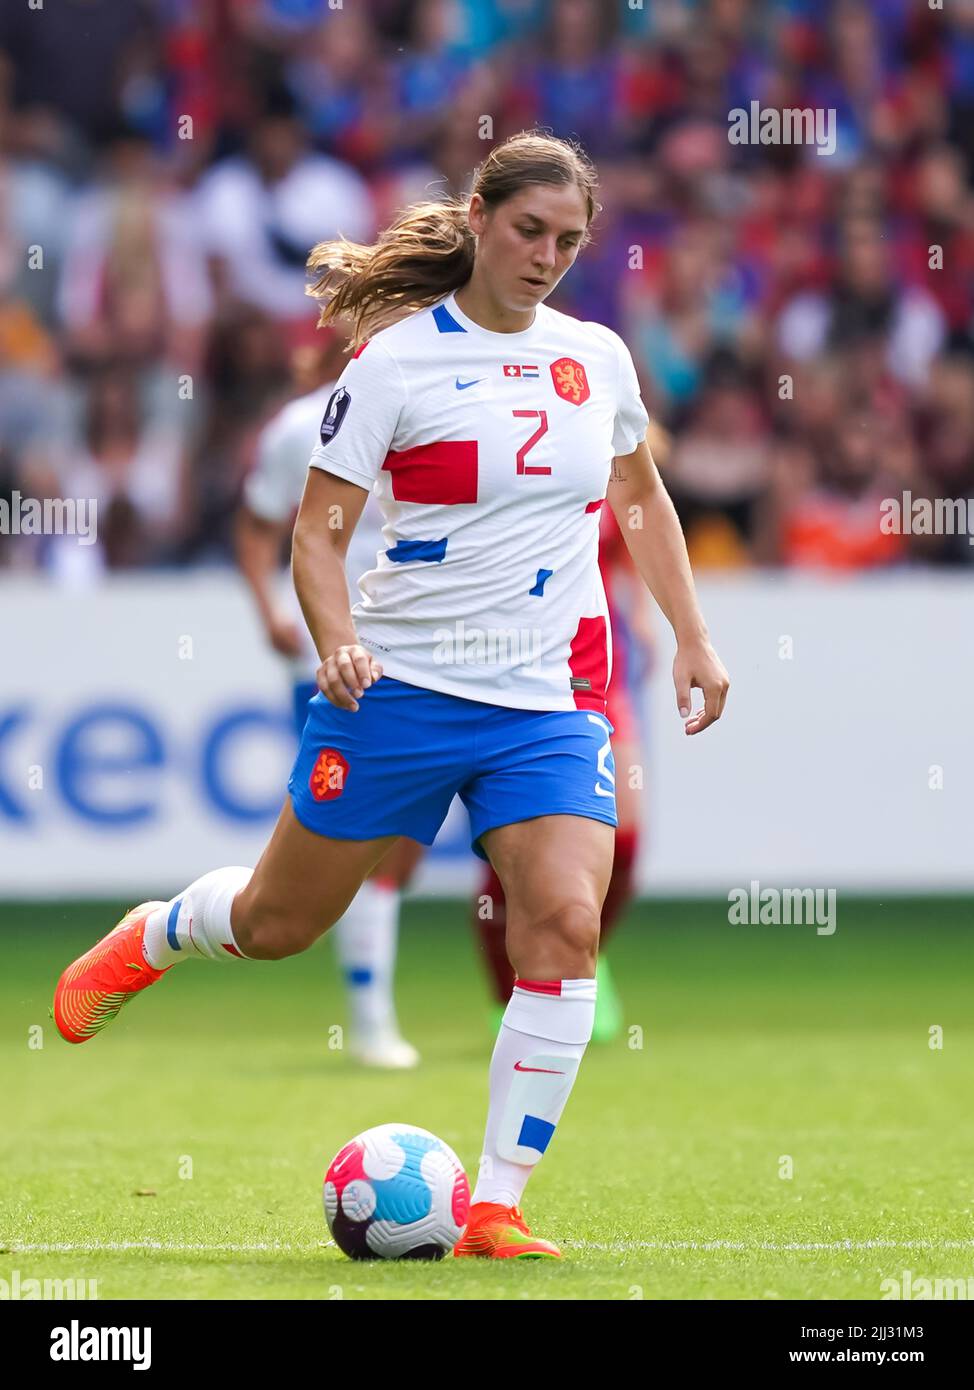 Sheffield, UK. 17th July, 2022. Sheffield, England, July 17th 2022: Aniek Nouwen (2 Netherlands) controls the ball during the UEFA Womens Euro 2022 group C football match between Switzerland and Netherlands at Bramall Lane in Sheffield, England. (Daniela Porcelli/SPP) Credit: SPP Sport Press Photo. /Alamy Live News Stock Photo